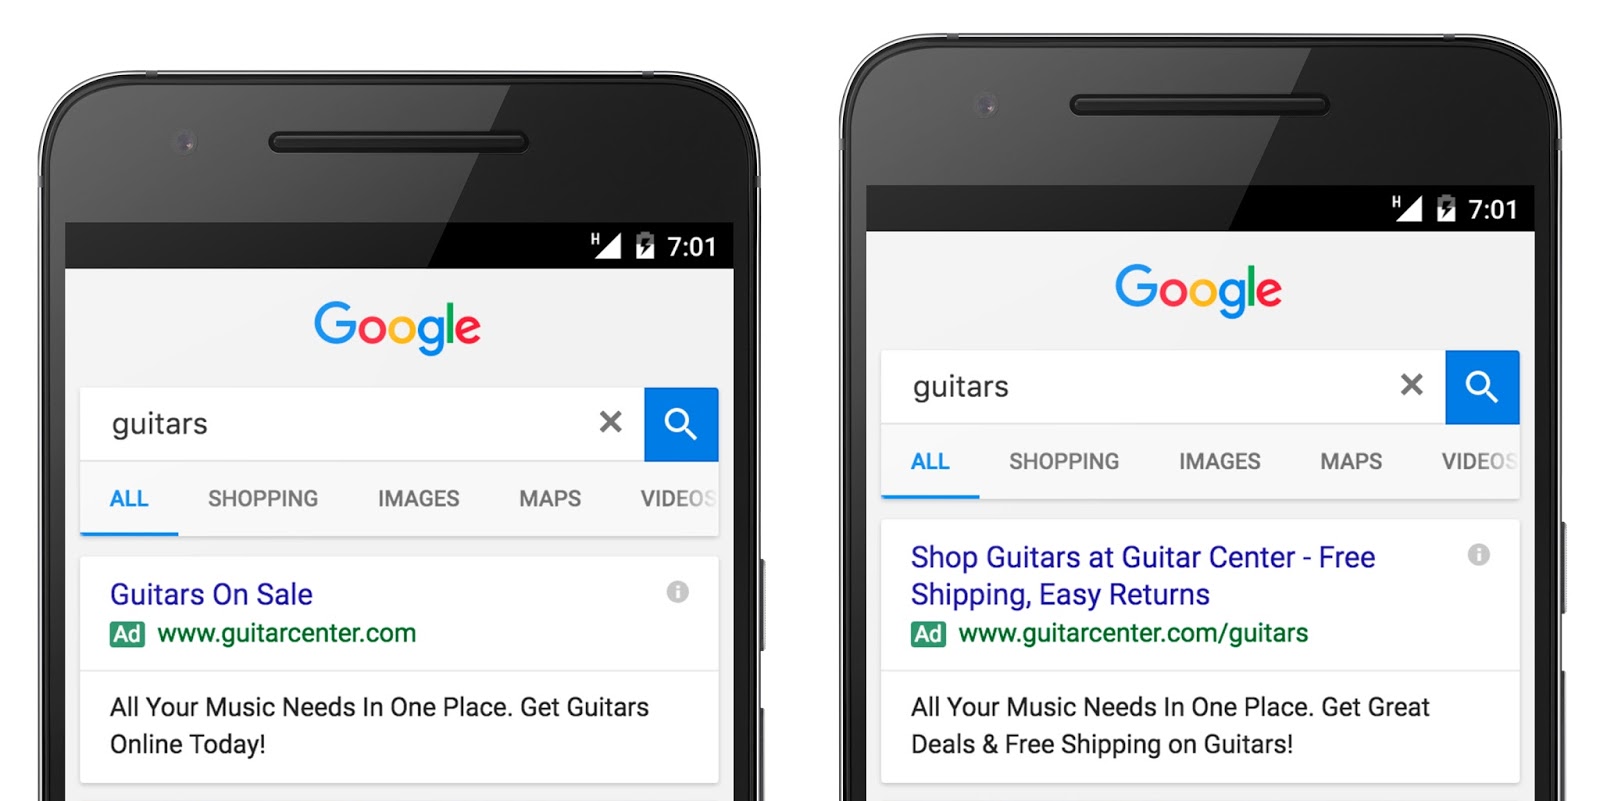 Google AdWords Expanded Text Ads